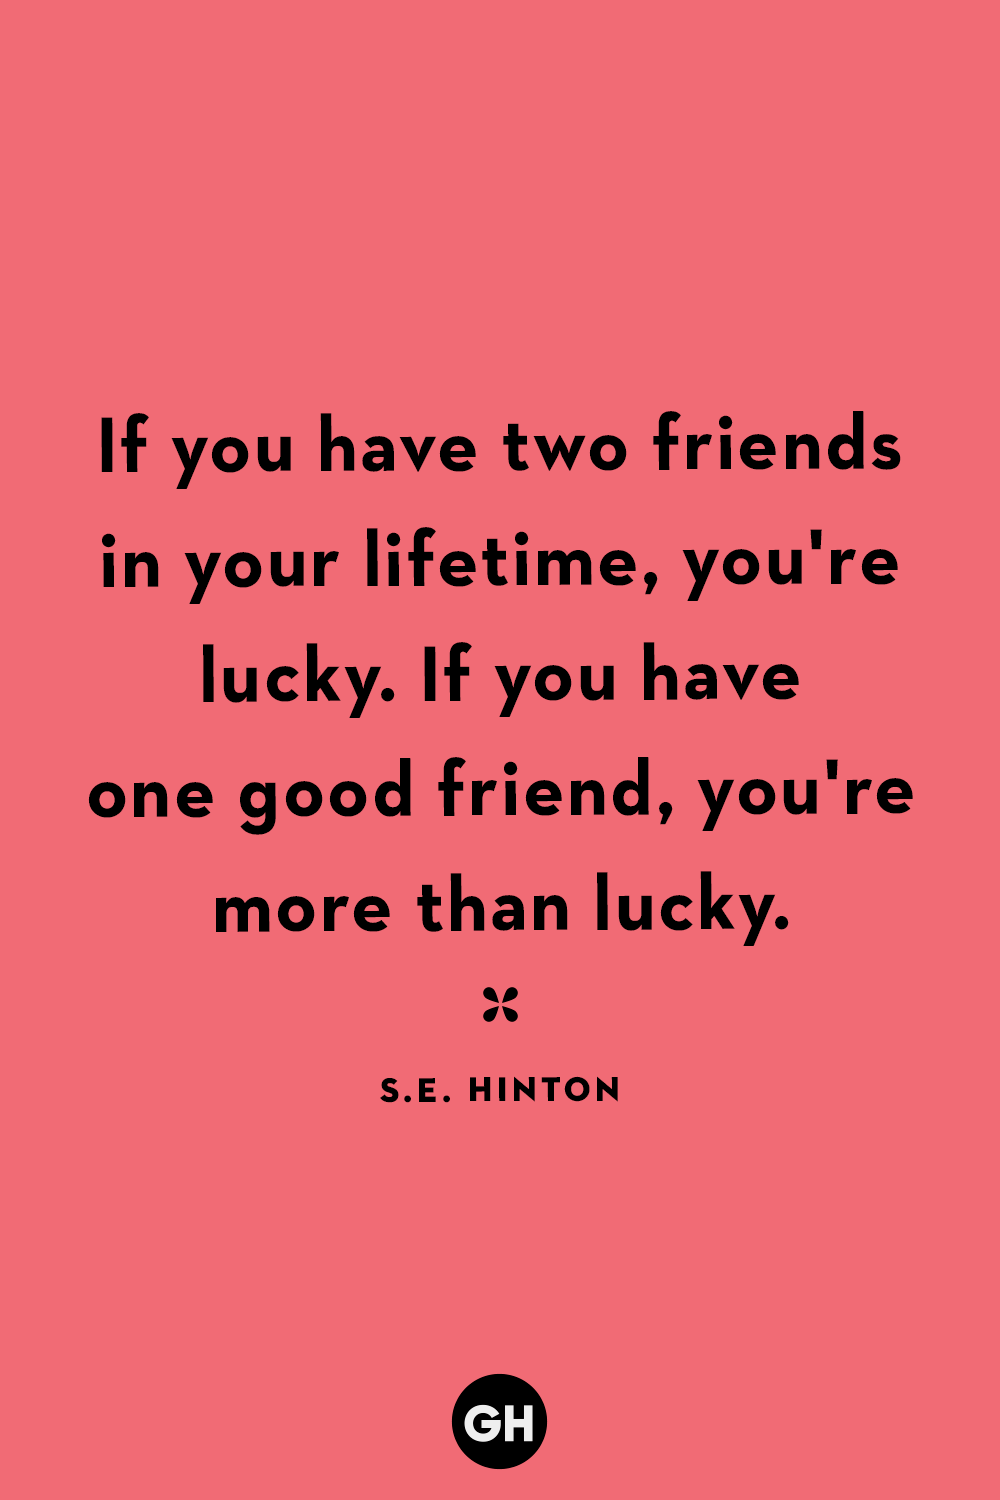 quotes about best friends for life